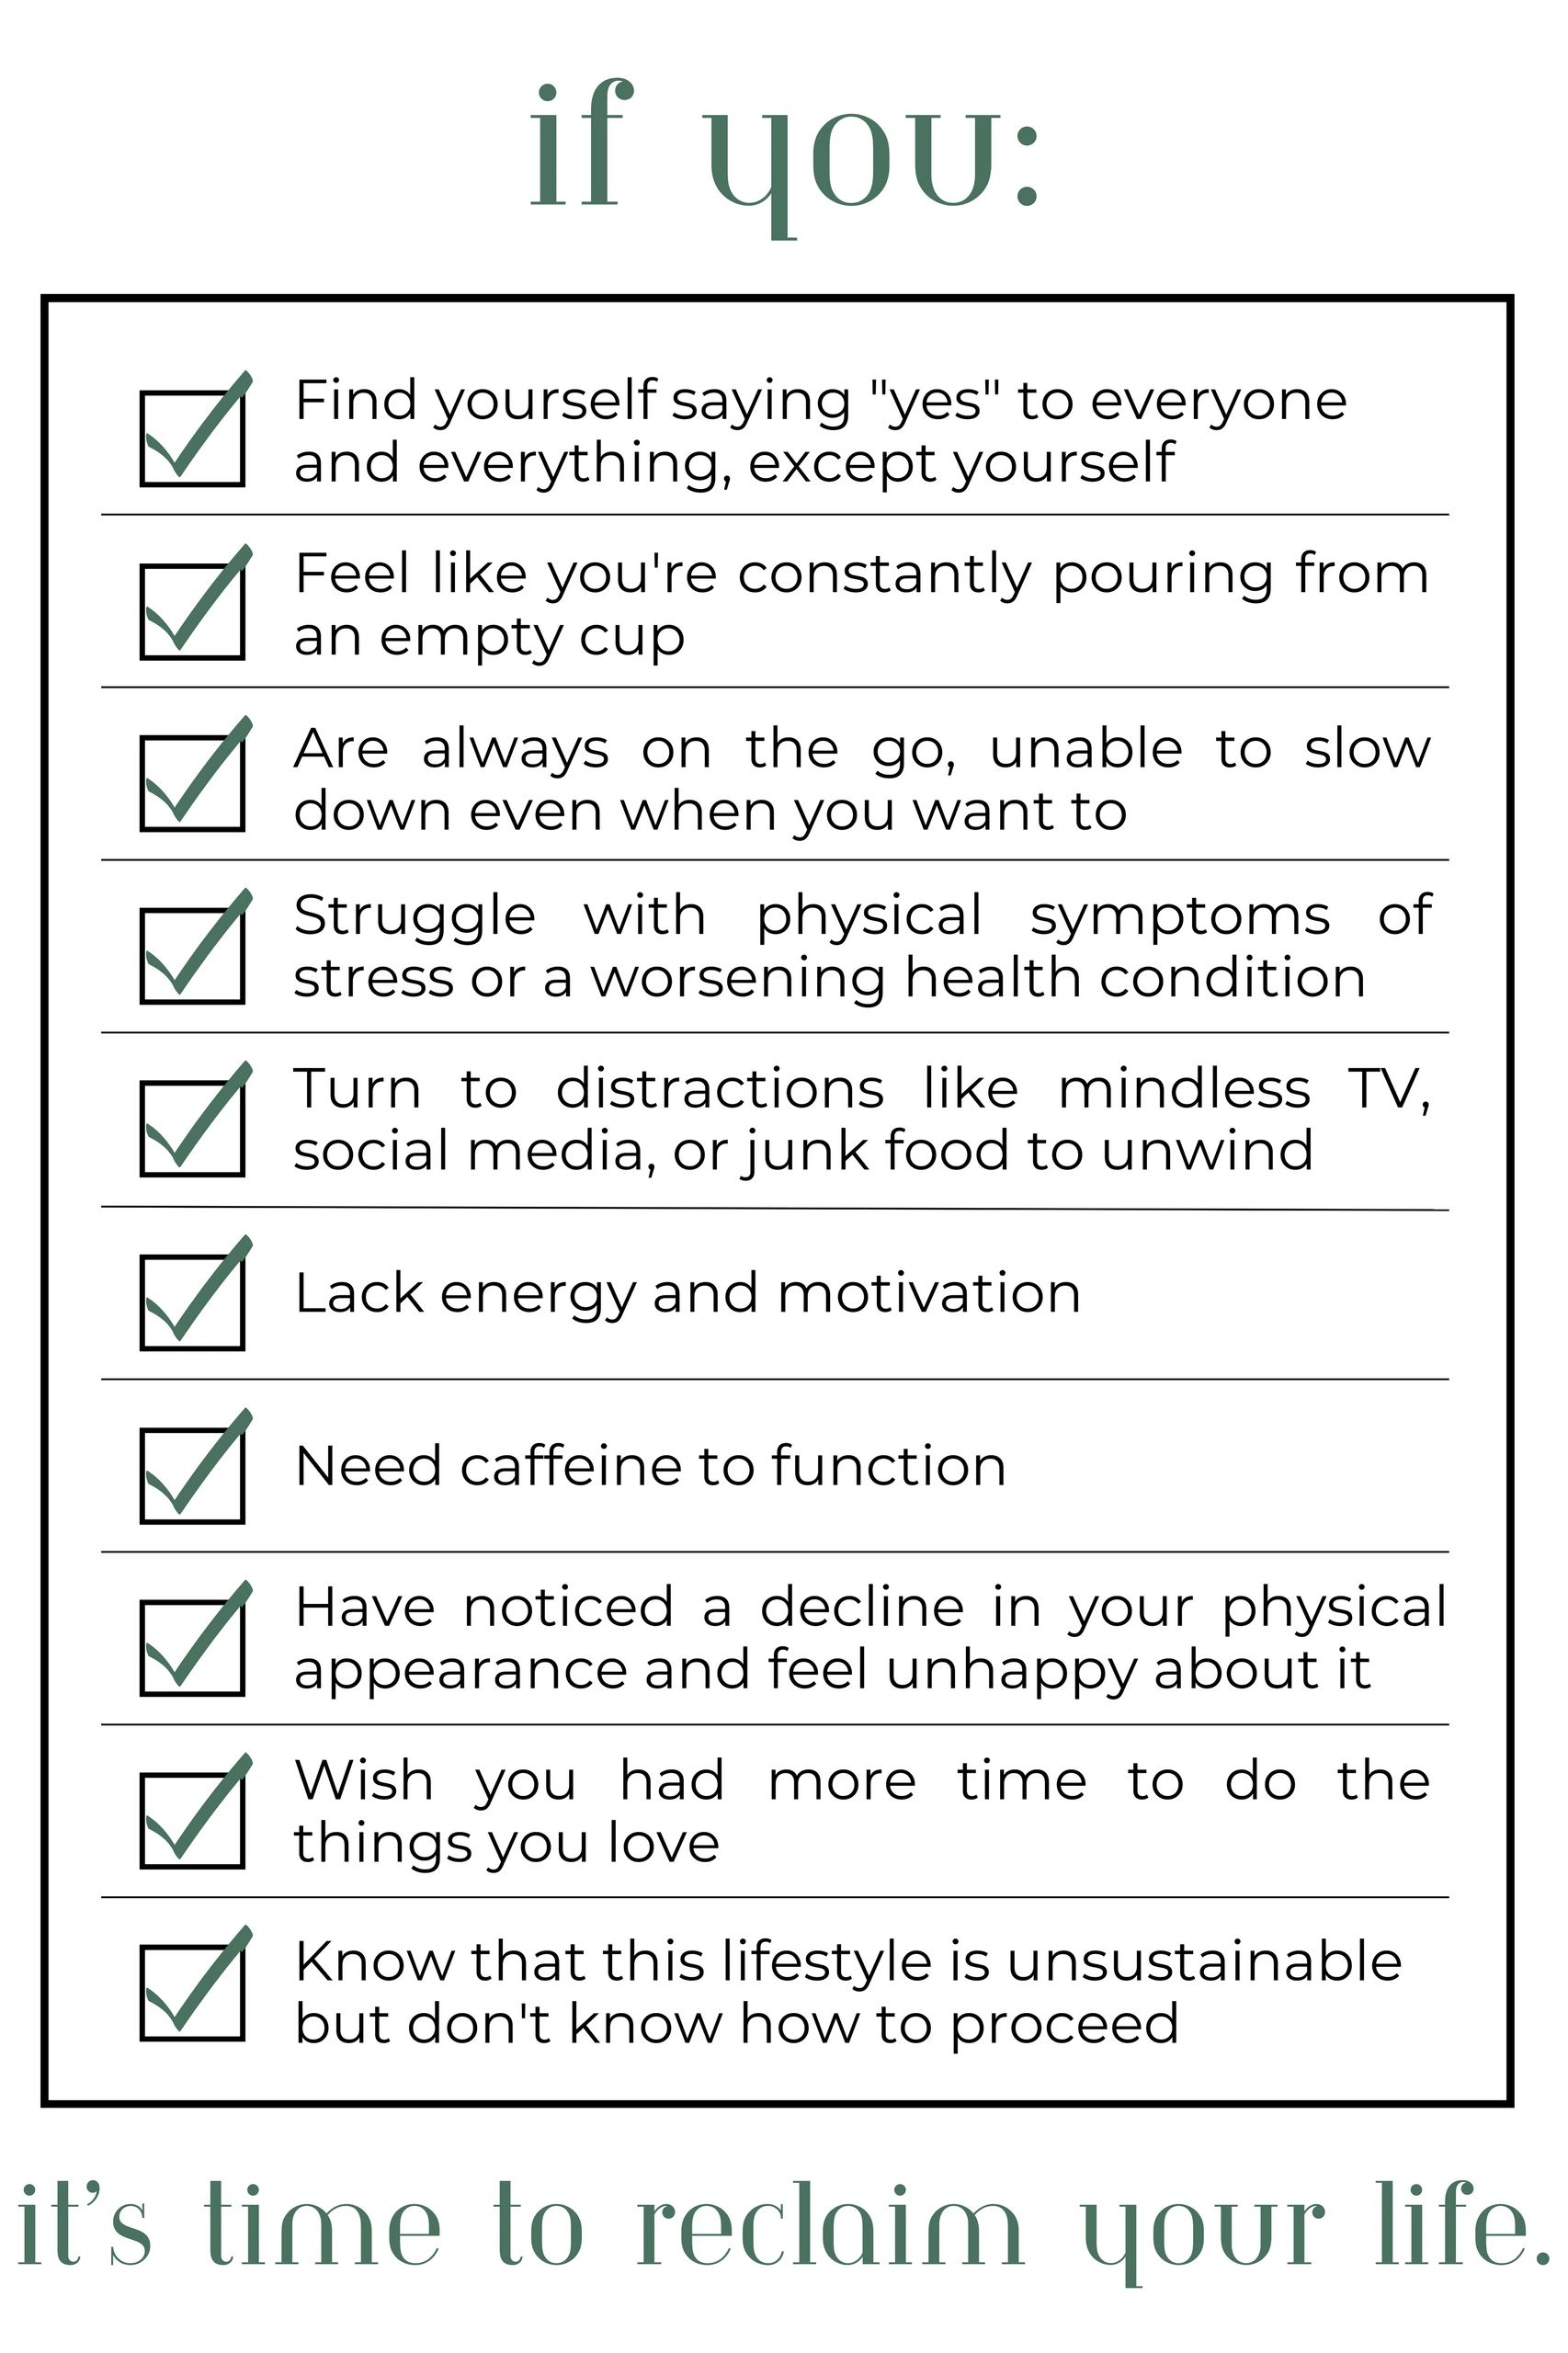 Checklist of reasons to work with a health coach.